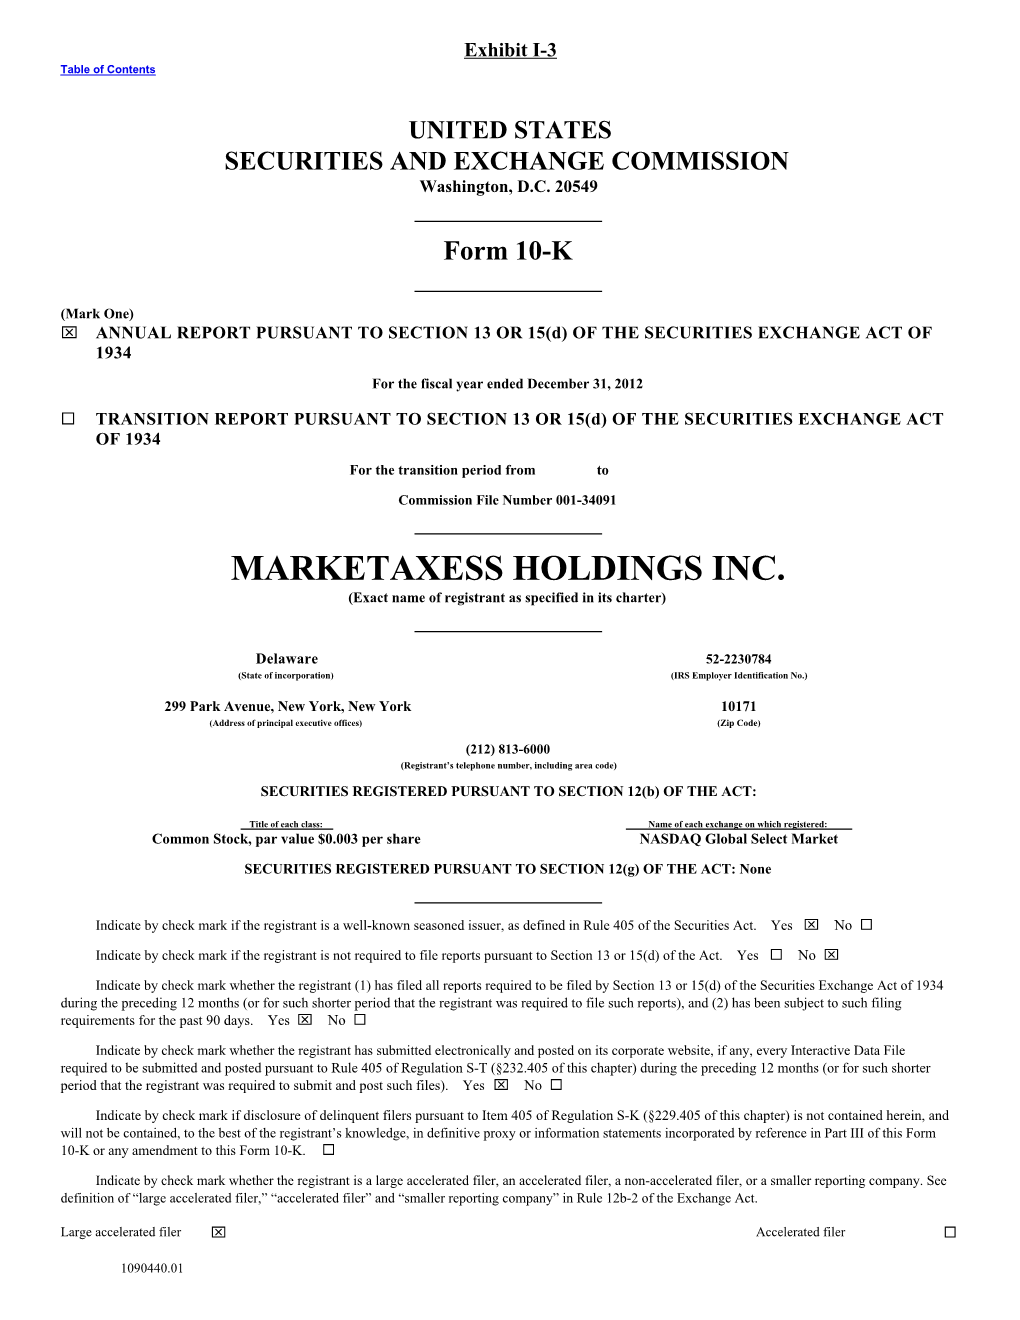 MARKETAXESS HOLDINGS INC. (Exact Name of Registrant As Specified in Its Charter)